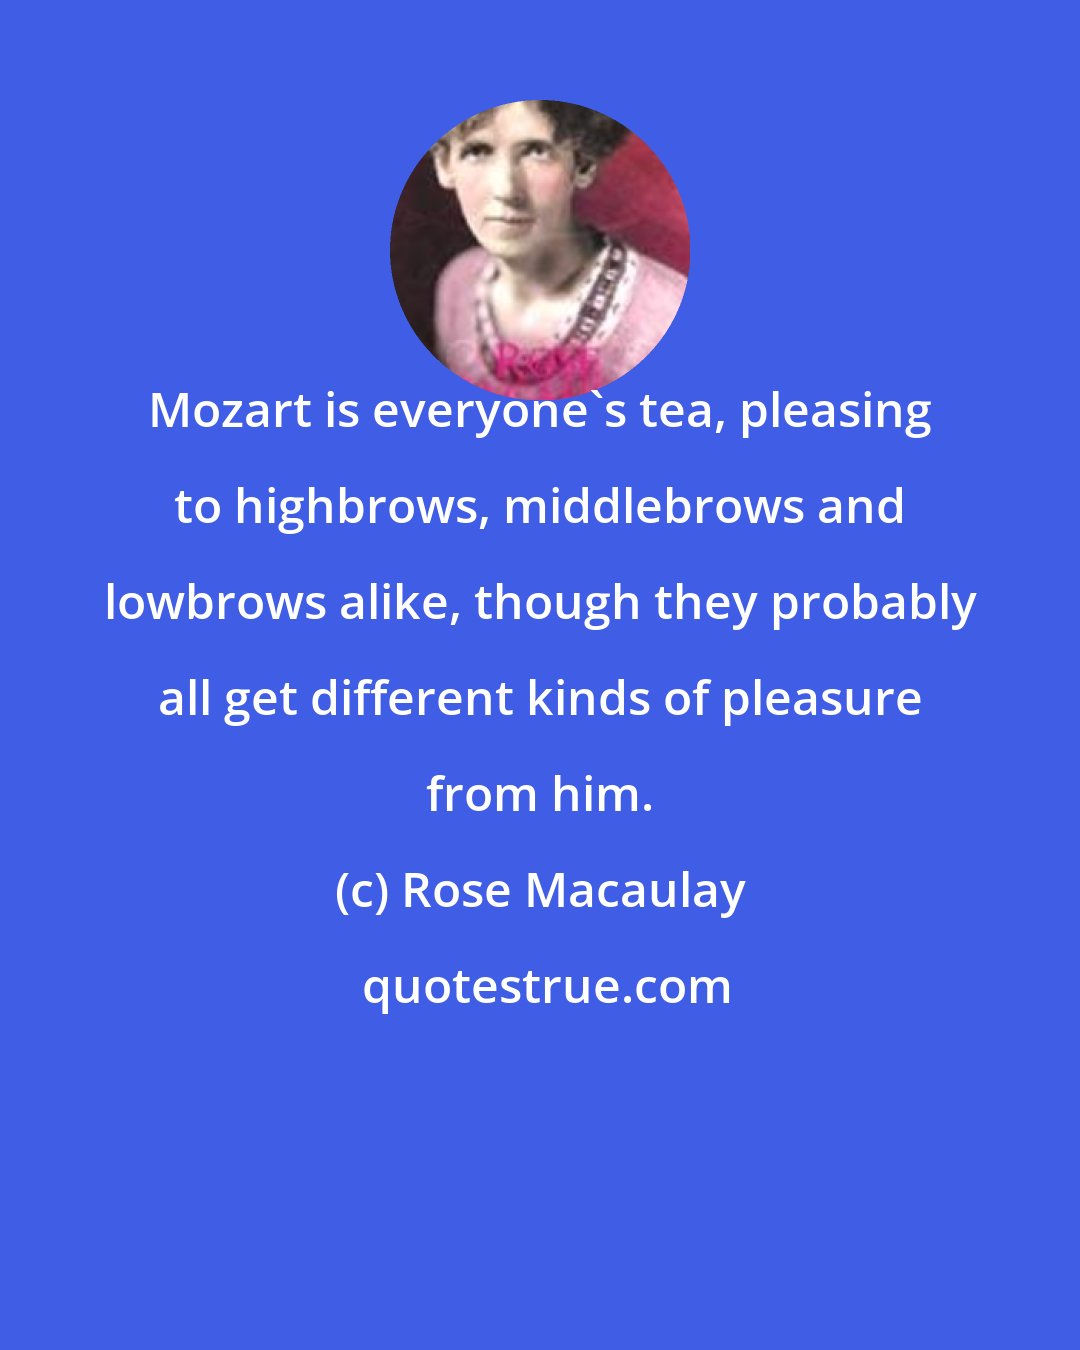 Rose Macaulay: Mozart is everyone's tea, pleasing to highbrows, middlebrows and lowbrows alike, though they probably all get different kinds of pleasure from him.